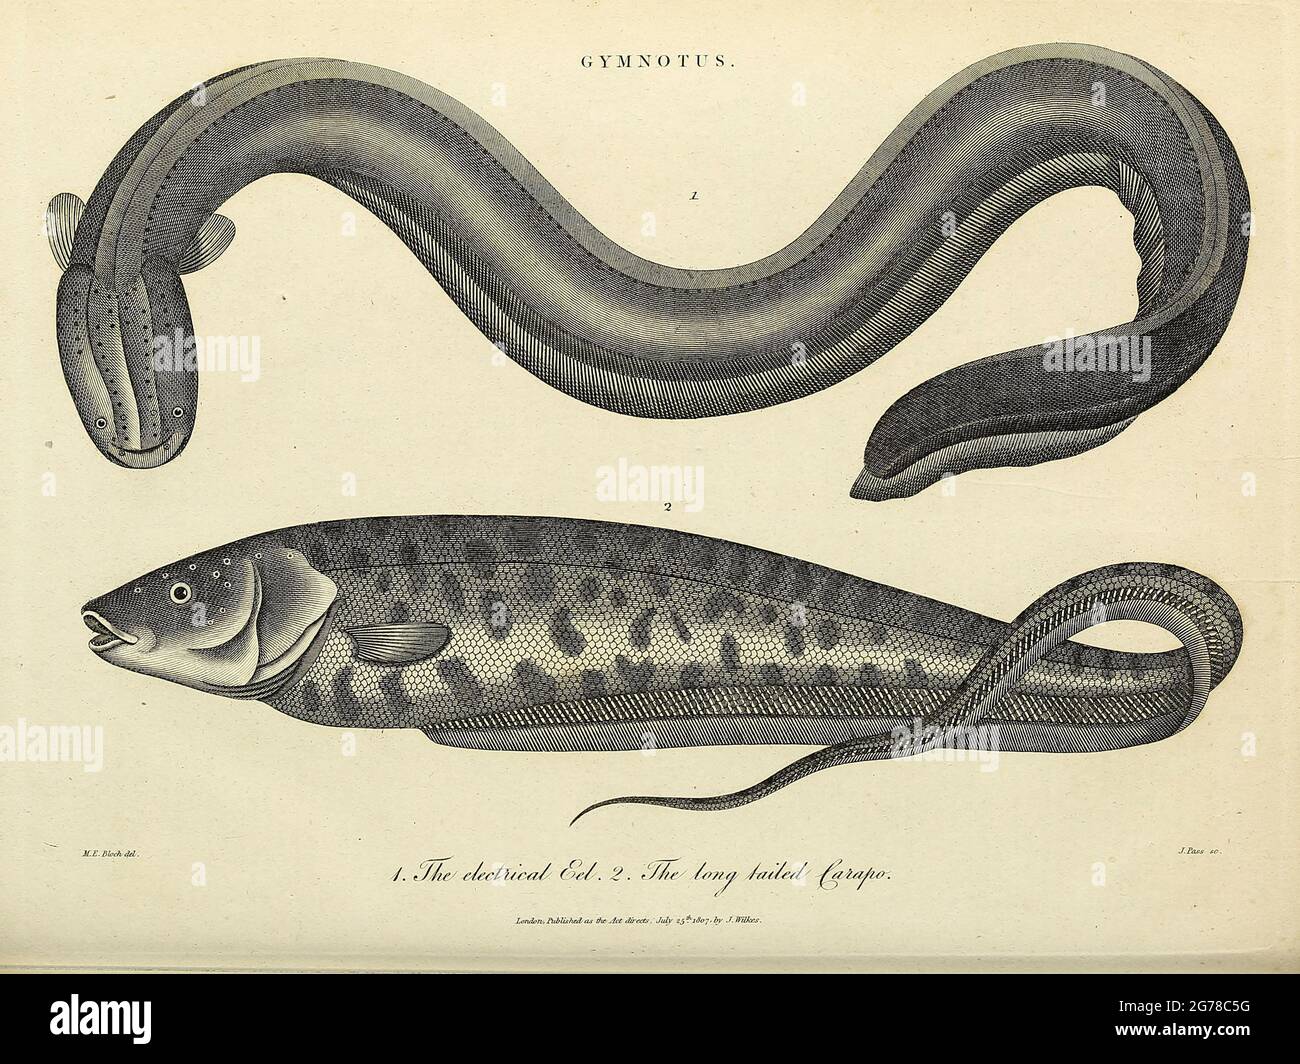 Gymnotus (banded knifefish) is a genus of Neotropical freshwater fish in the family Gymnotidae found widely in South America, Central America and southern Mexico Copperplate engraving From the Encyclopaedia Londinensis or, Universal dictionary of arts, sciences, and literature; Volume IX;  Edited by Wilkes, John. Published in London in 1811 Stock Photo